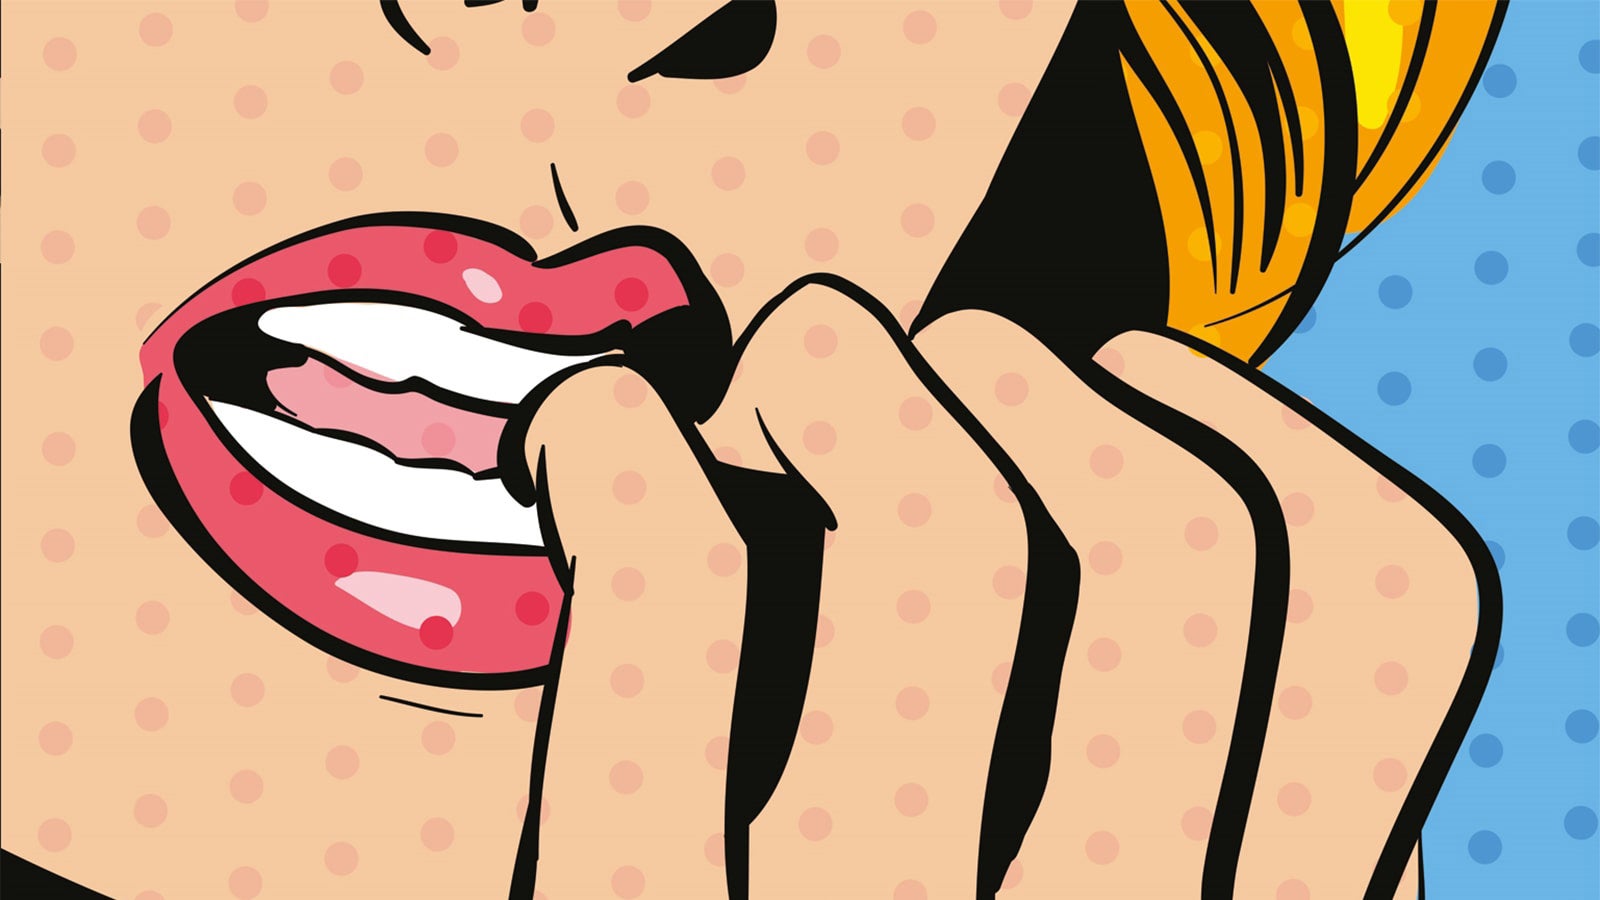 Pop Art style woman's mouth biting her nails